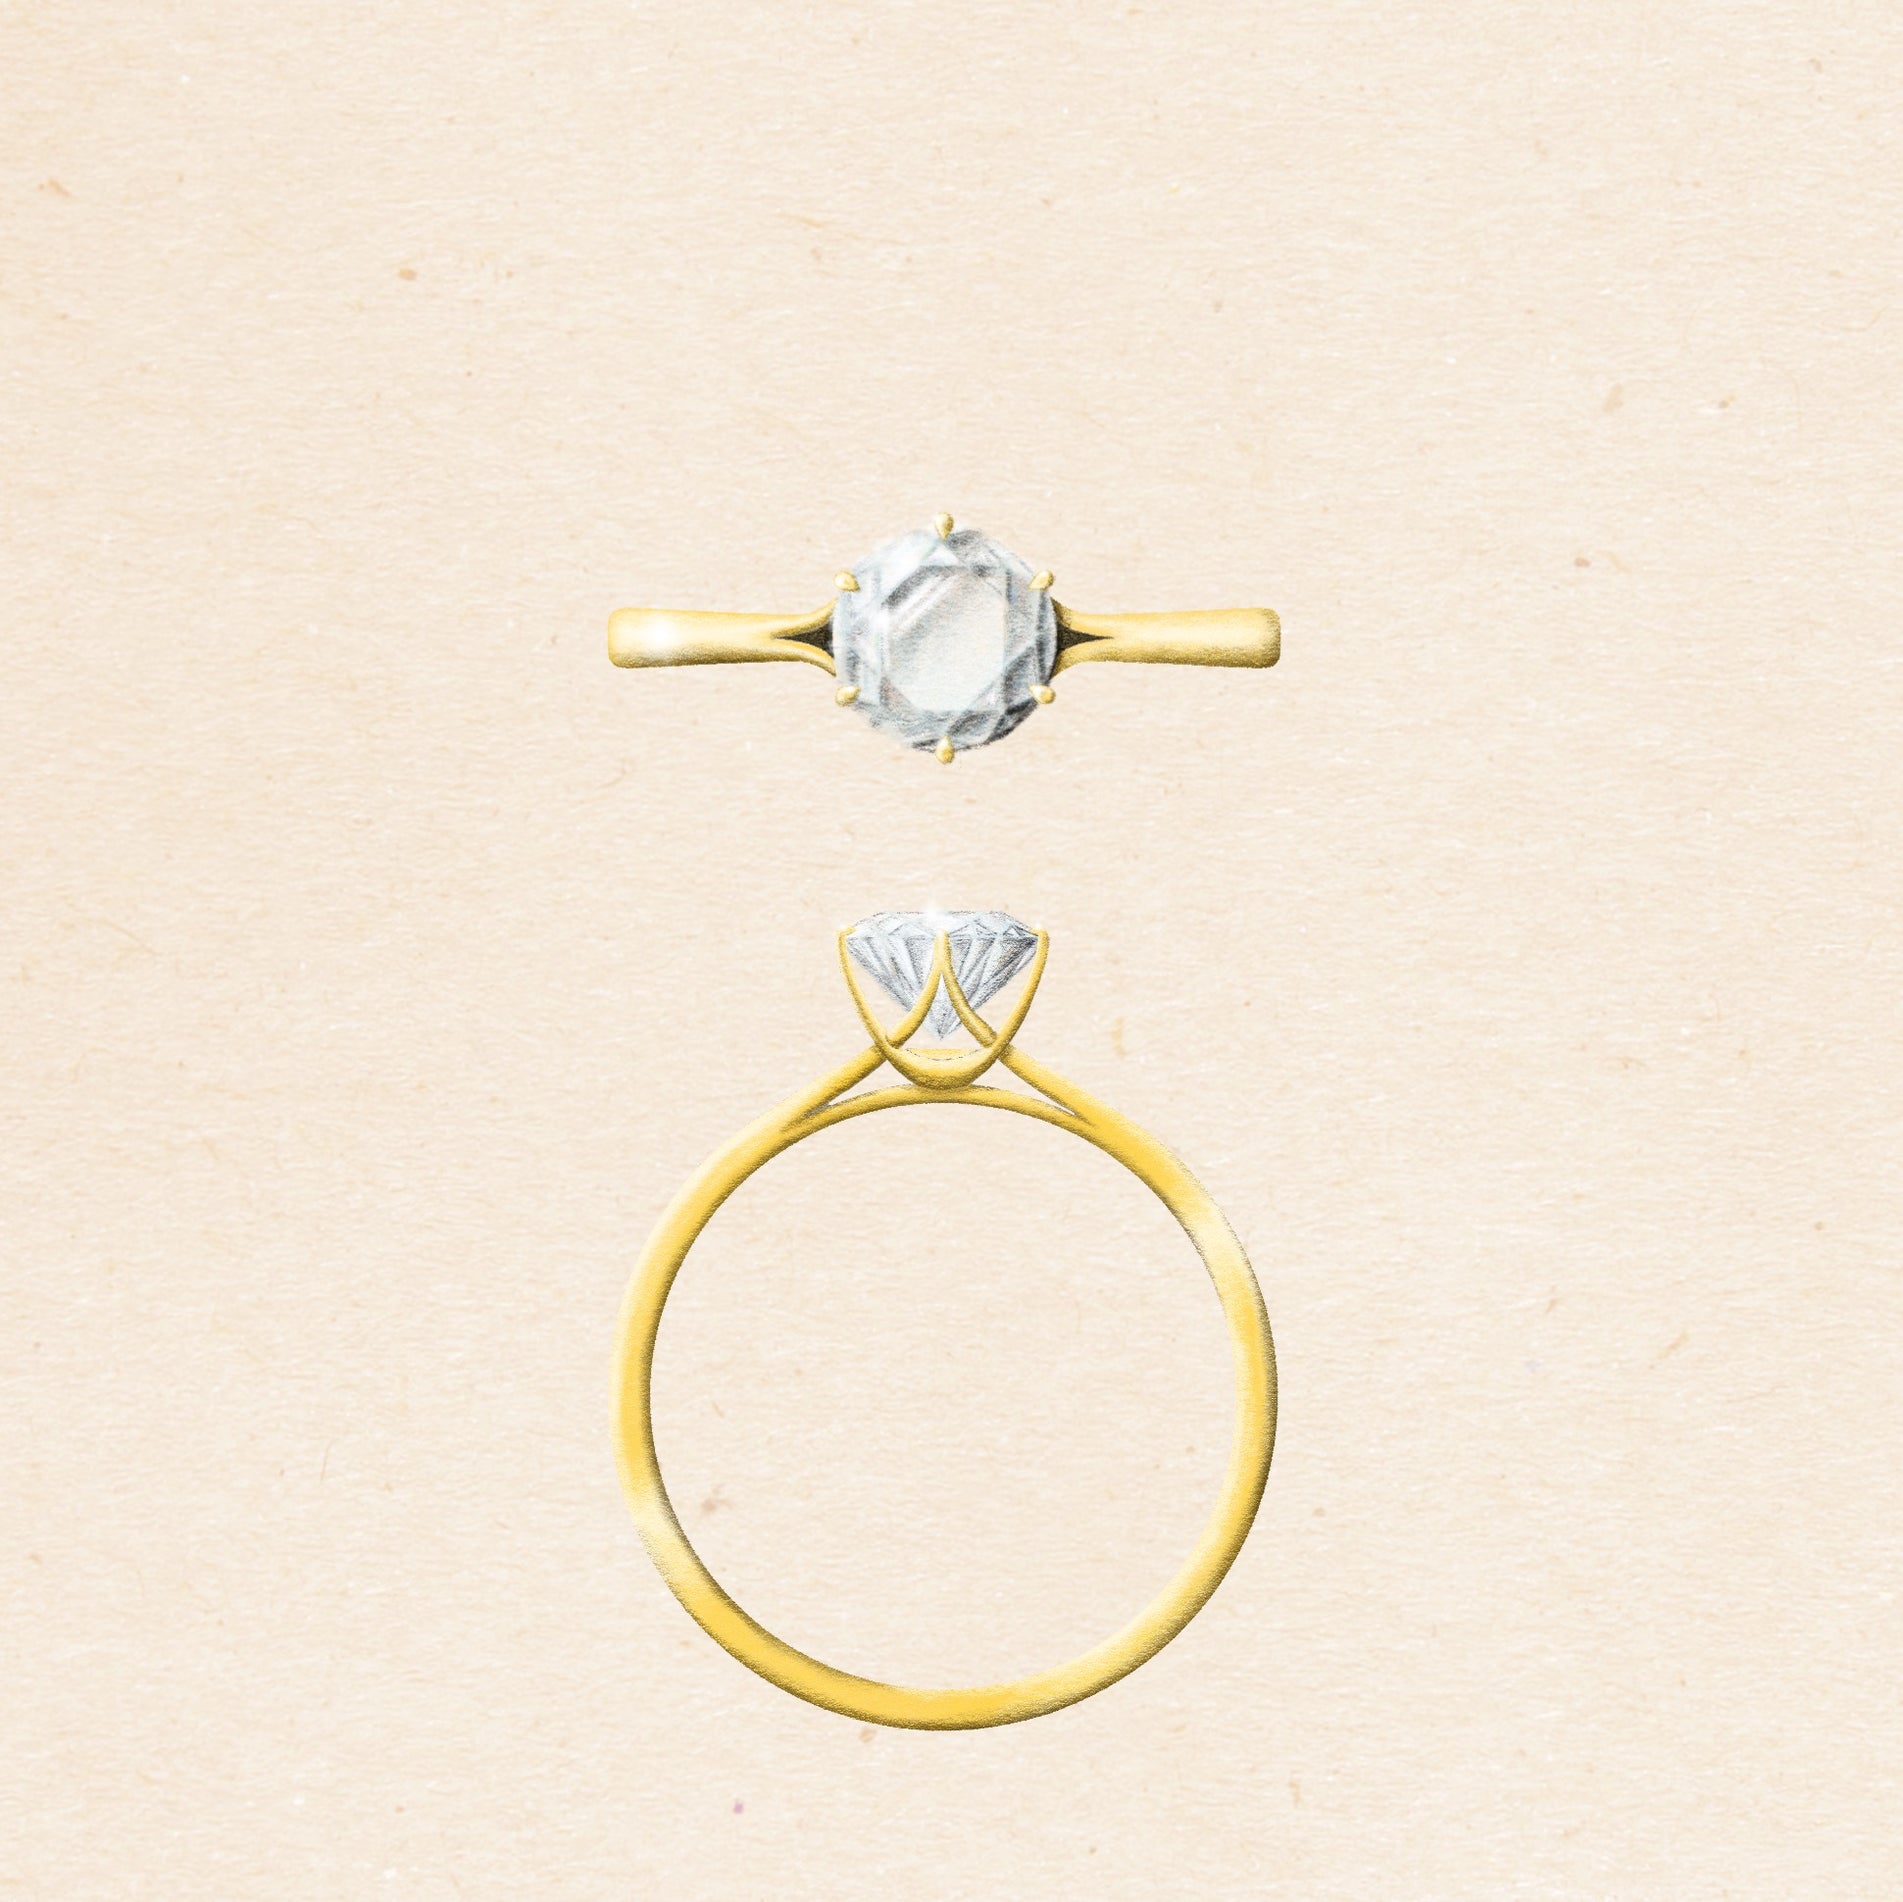 Engagement ring illustration of classic ring design solitaire diamond set in 18k yellow gold 